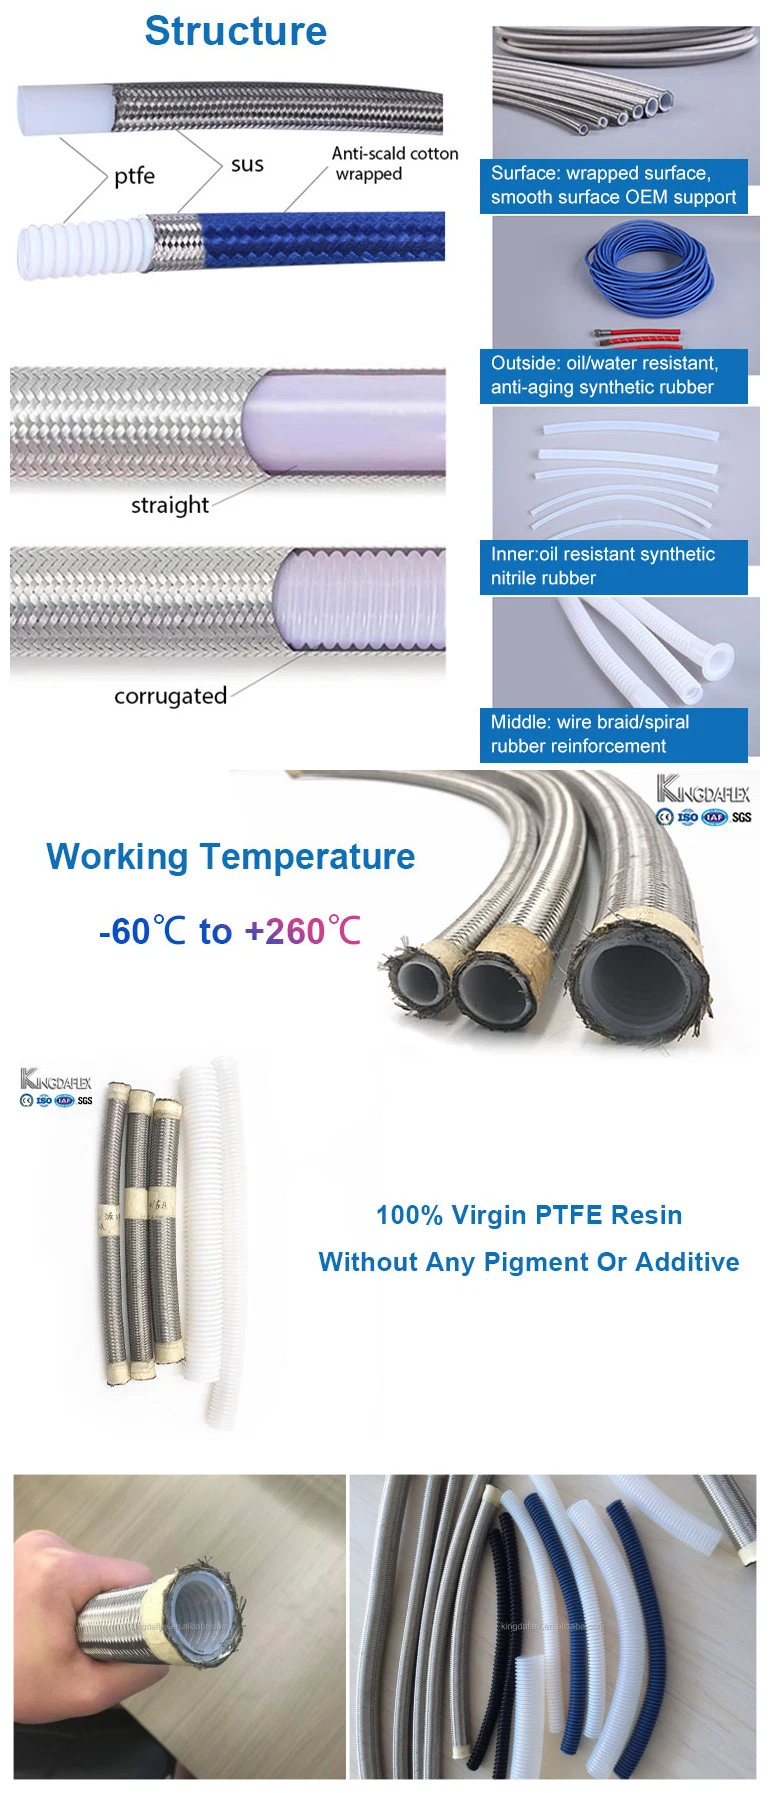 Stainless Steel 304 Wire Braiding Hose with Fittings